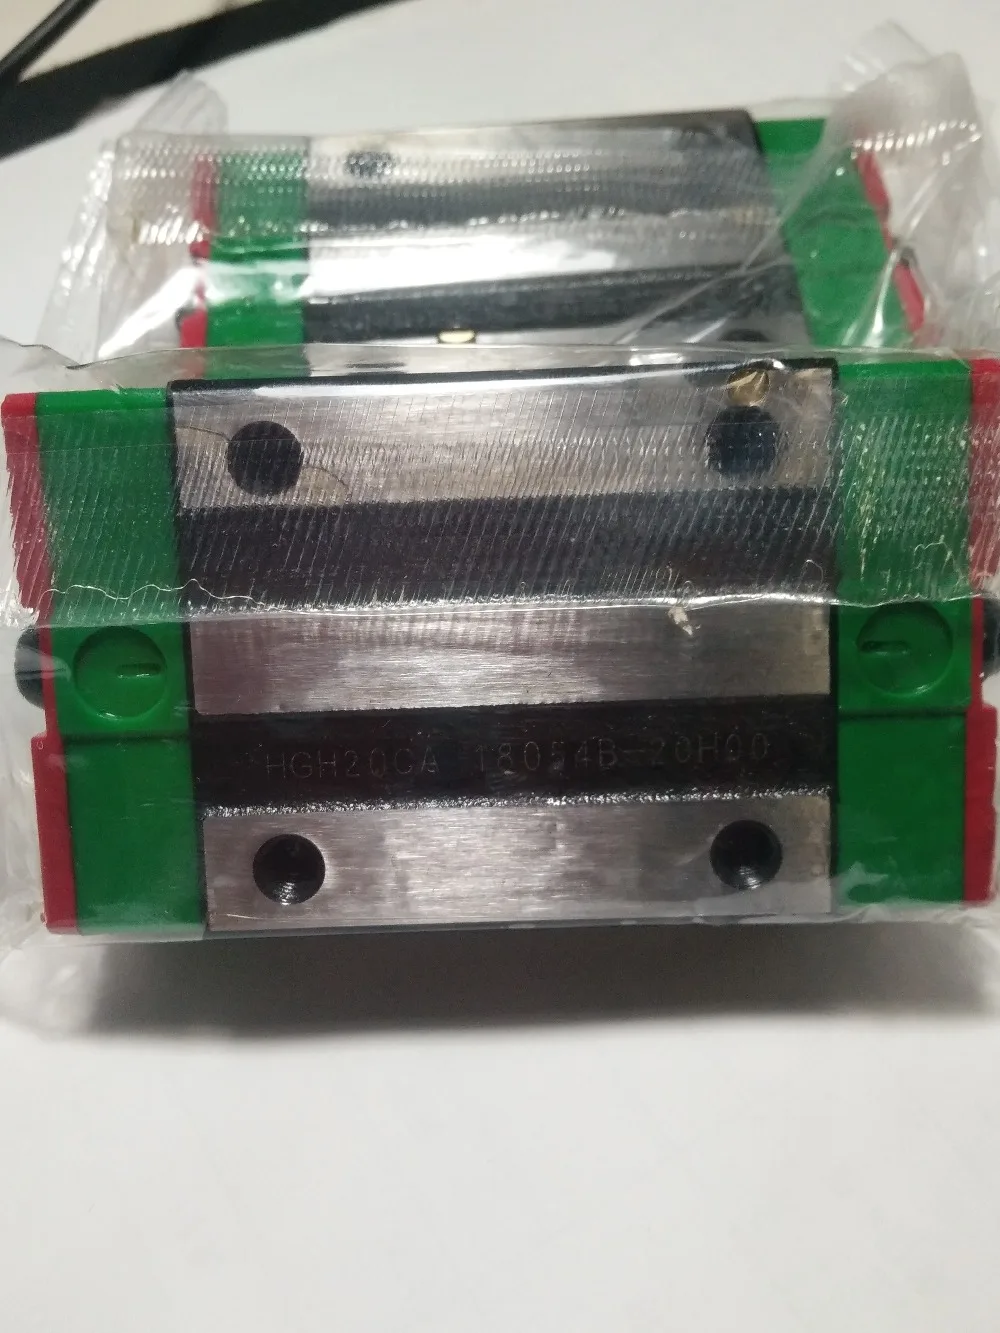 

New Original HIWIN HGH HGH20 block series Linear Block HGH20CA Sliding Carriage for 20mm width HGR20 linear guide rail